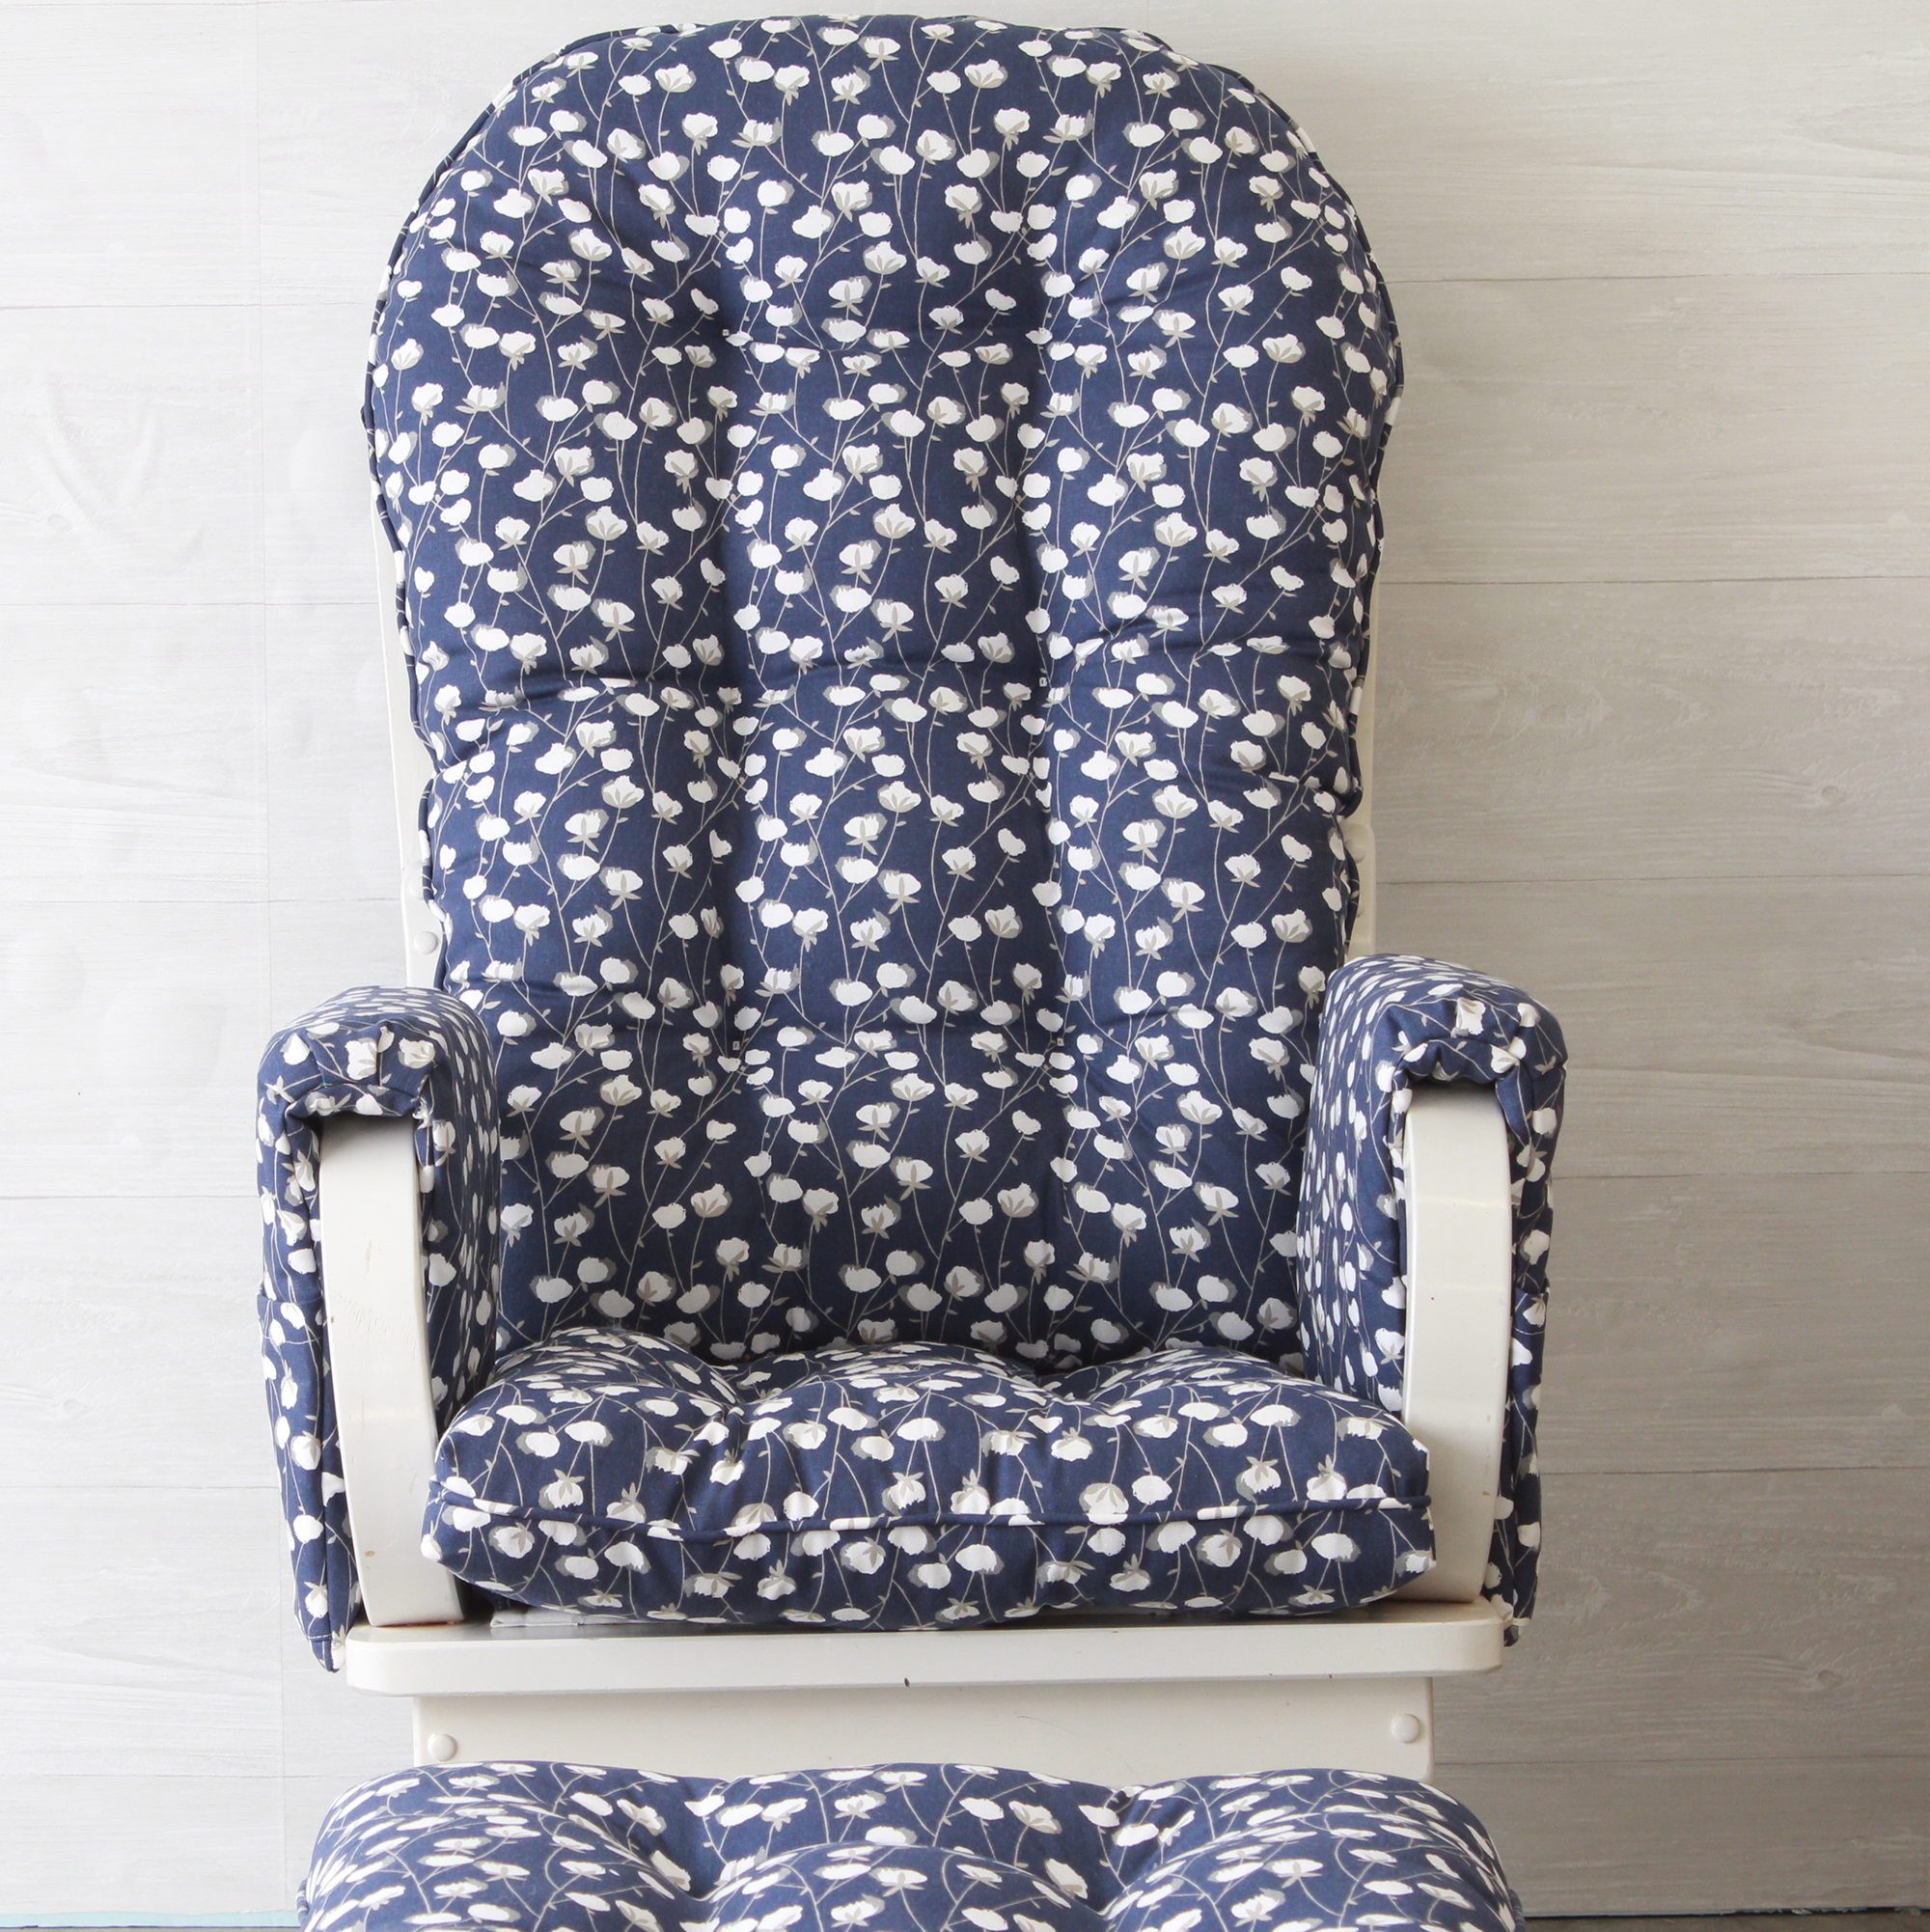 replacement cushions for a nursery glider or rocker with arm rest covers and ottoman cushion in navy upholstery fabric with white cotton bolls